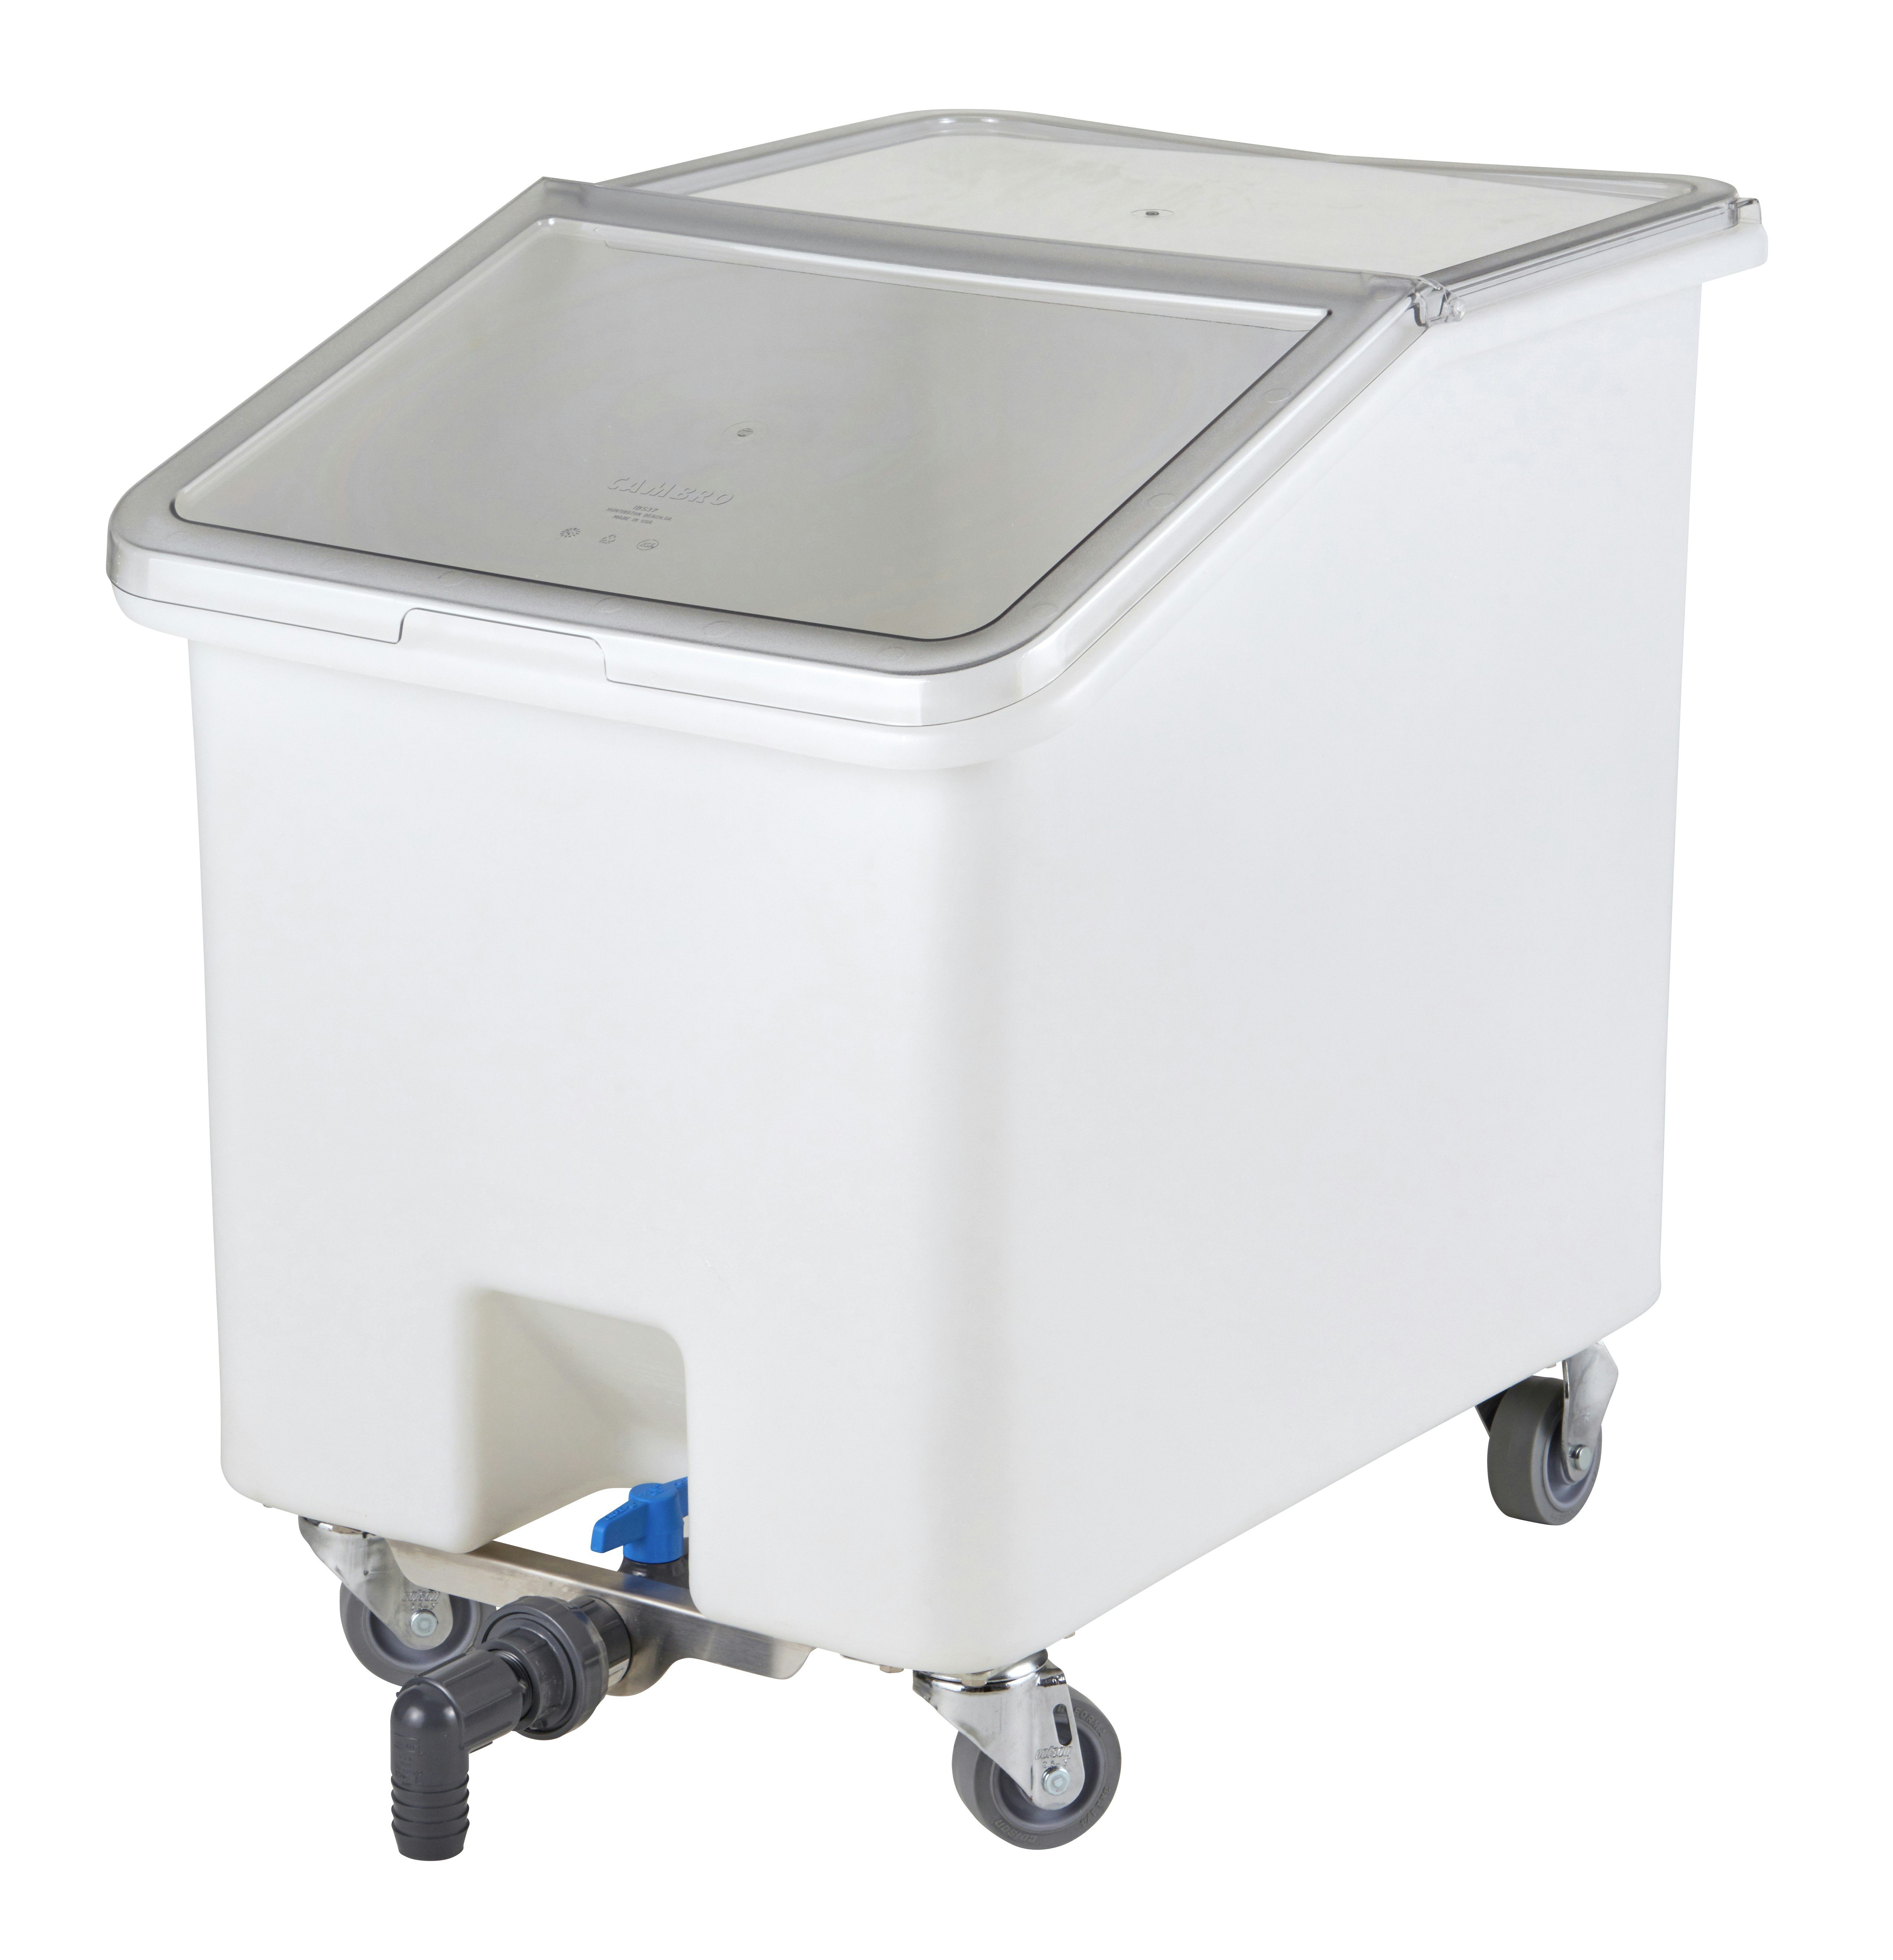 Food Grade Plastic Containers For Brining - The Virtual Weber Bullet